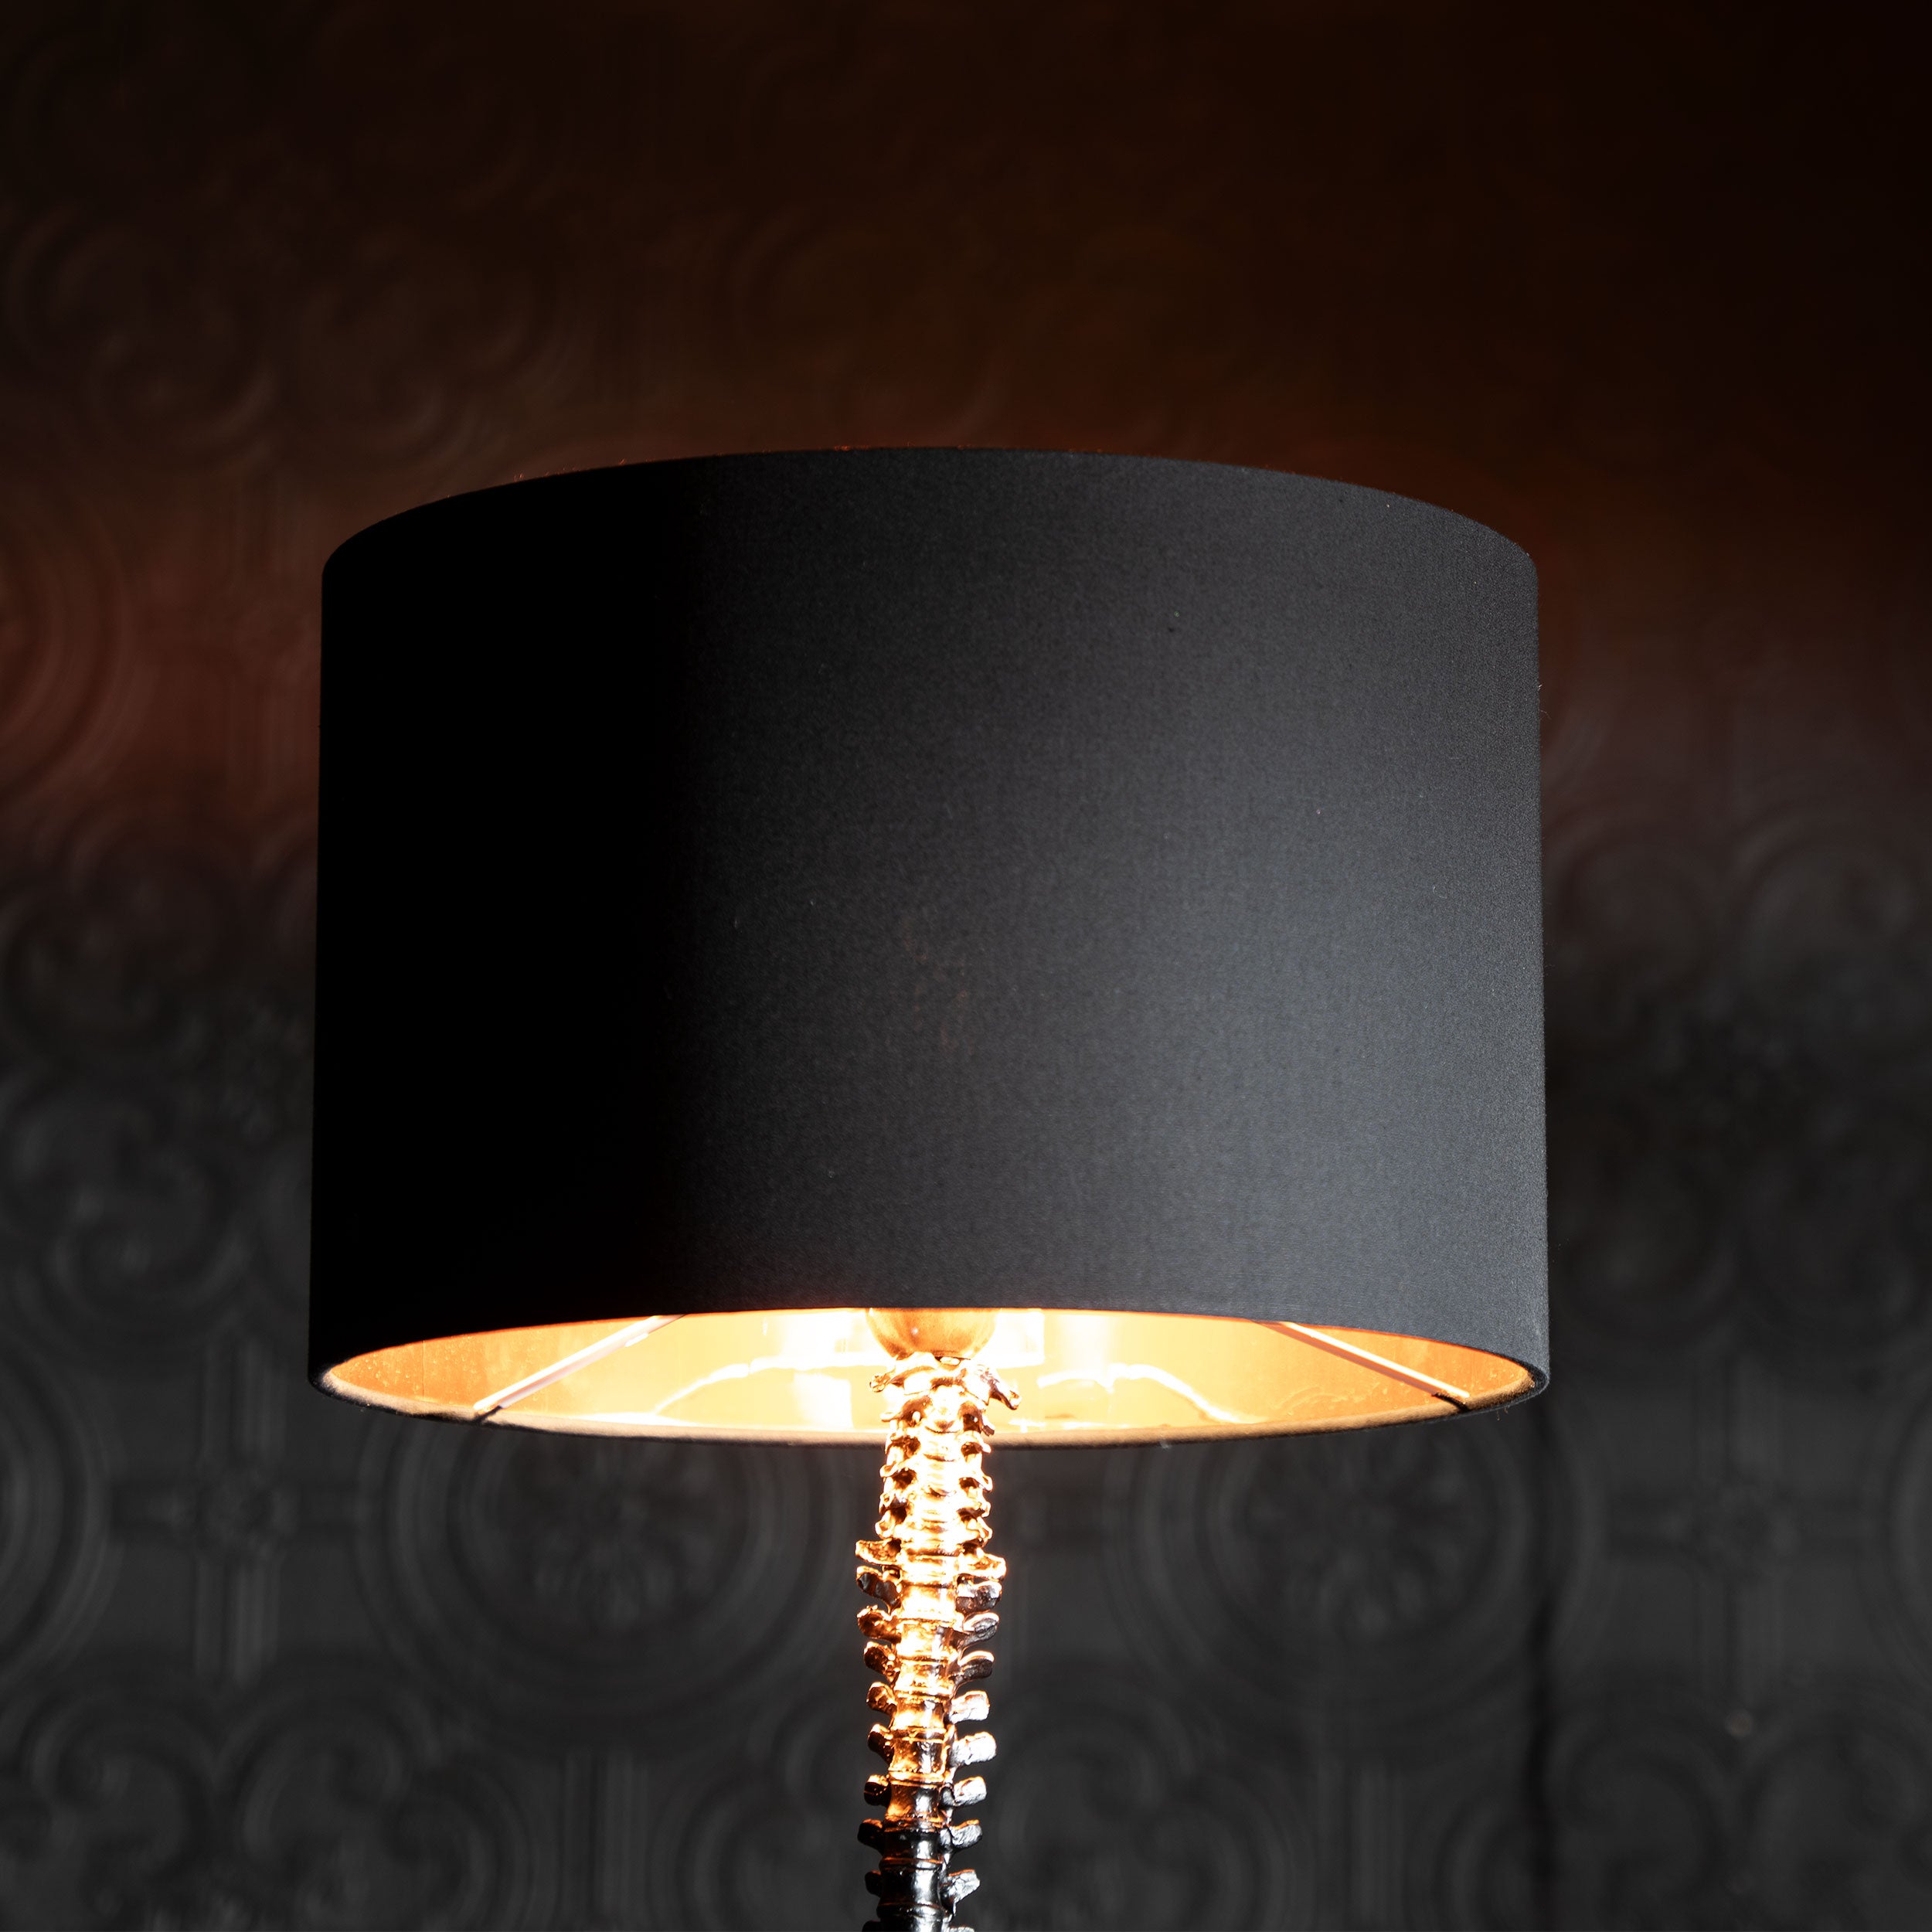 Animal Print Lamp shades, Ideal To Match animal print Wall Hangings &  Posters